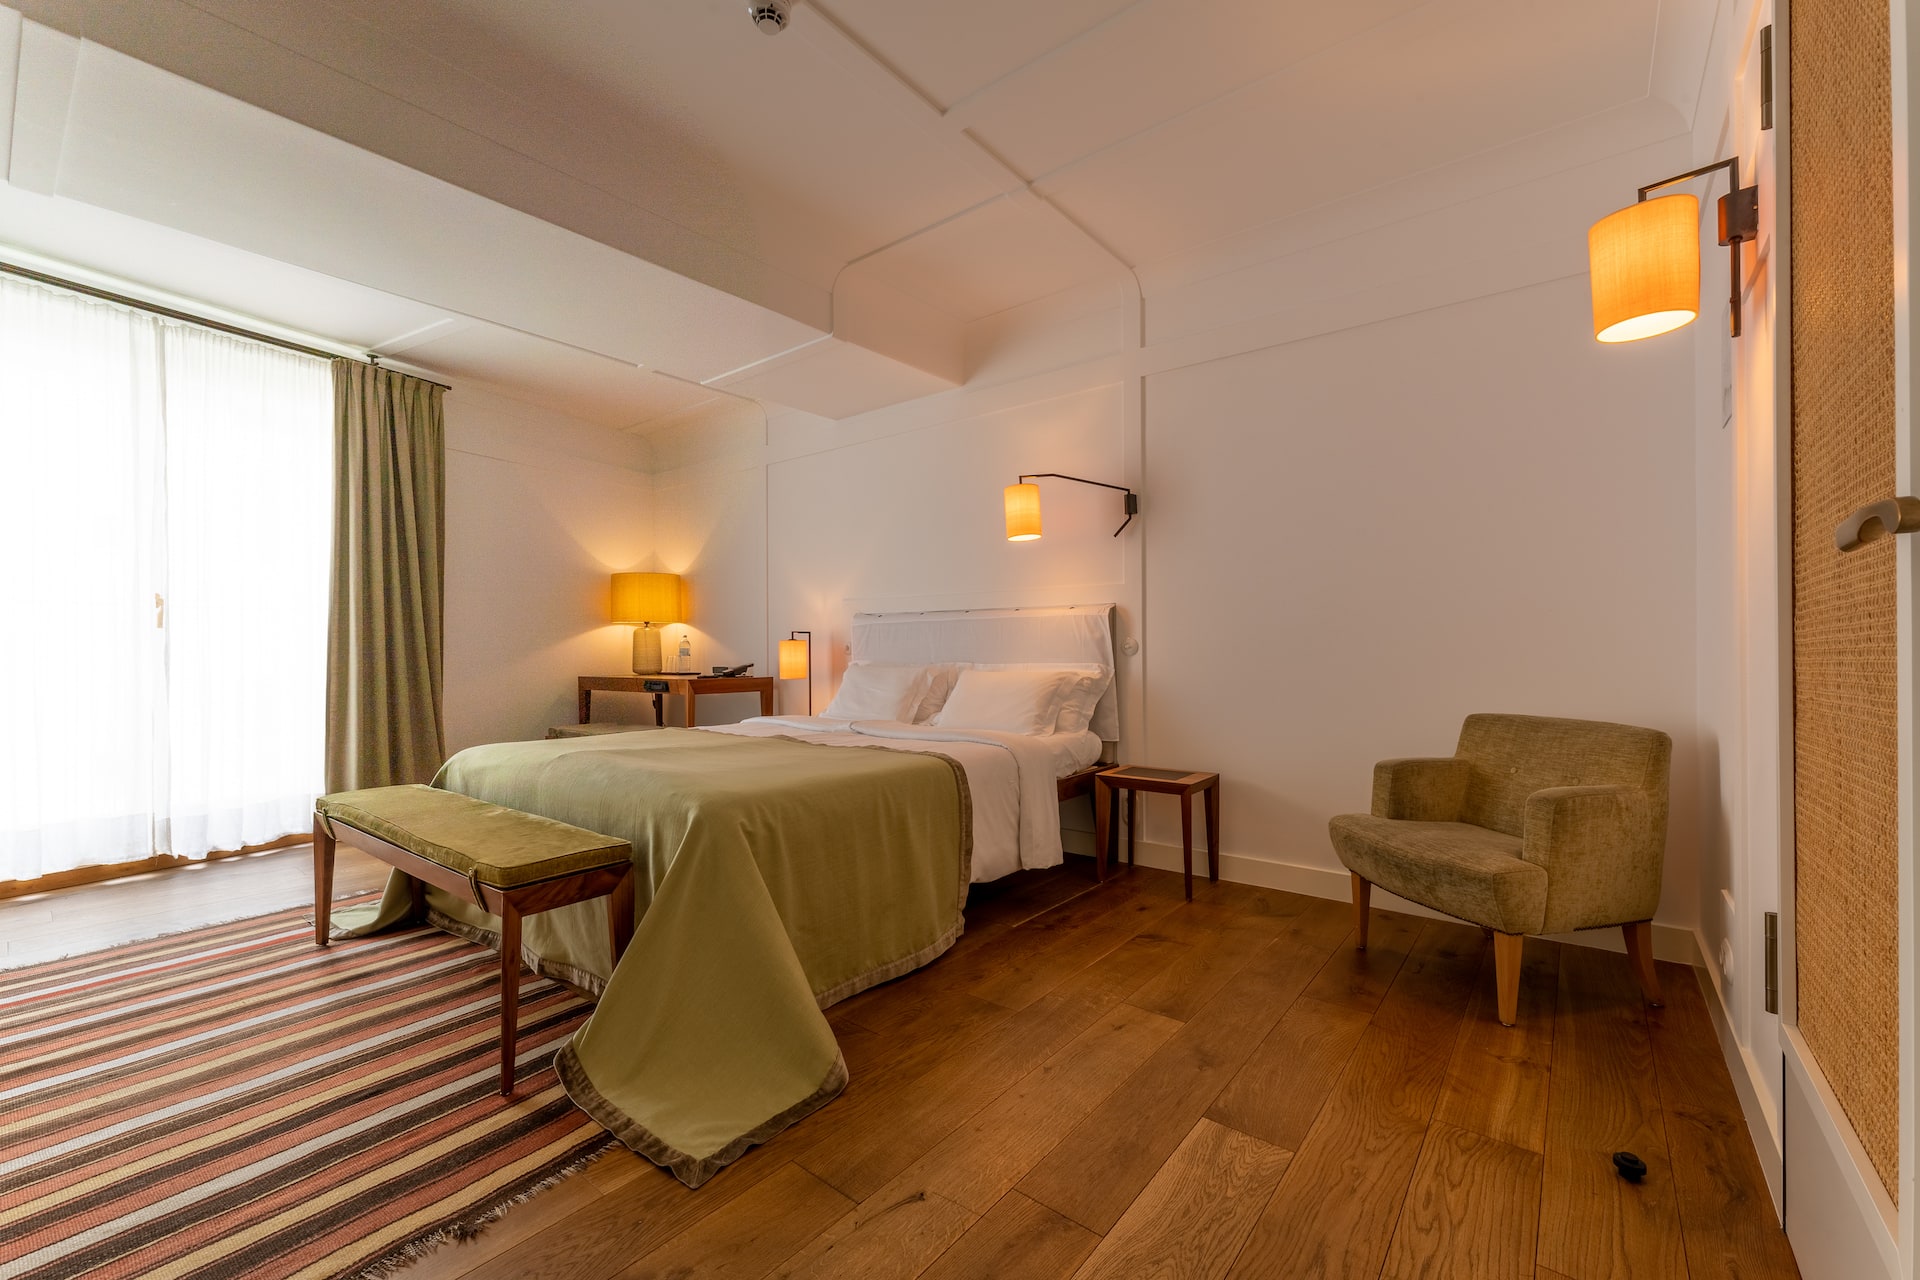 Superior room with a double bed and an armchair at the LOUIS Hotel Munich